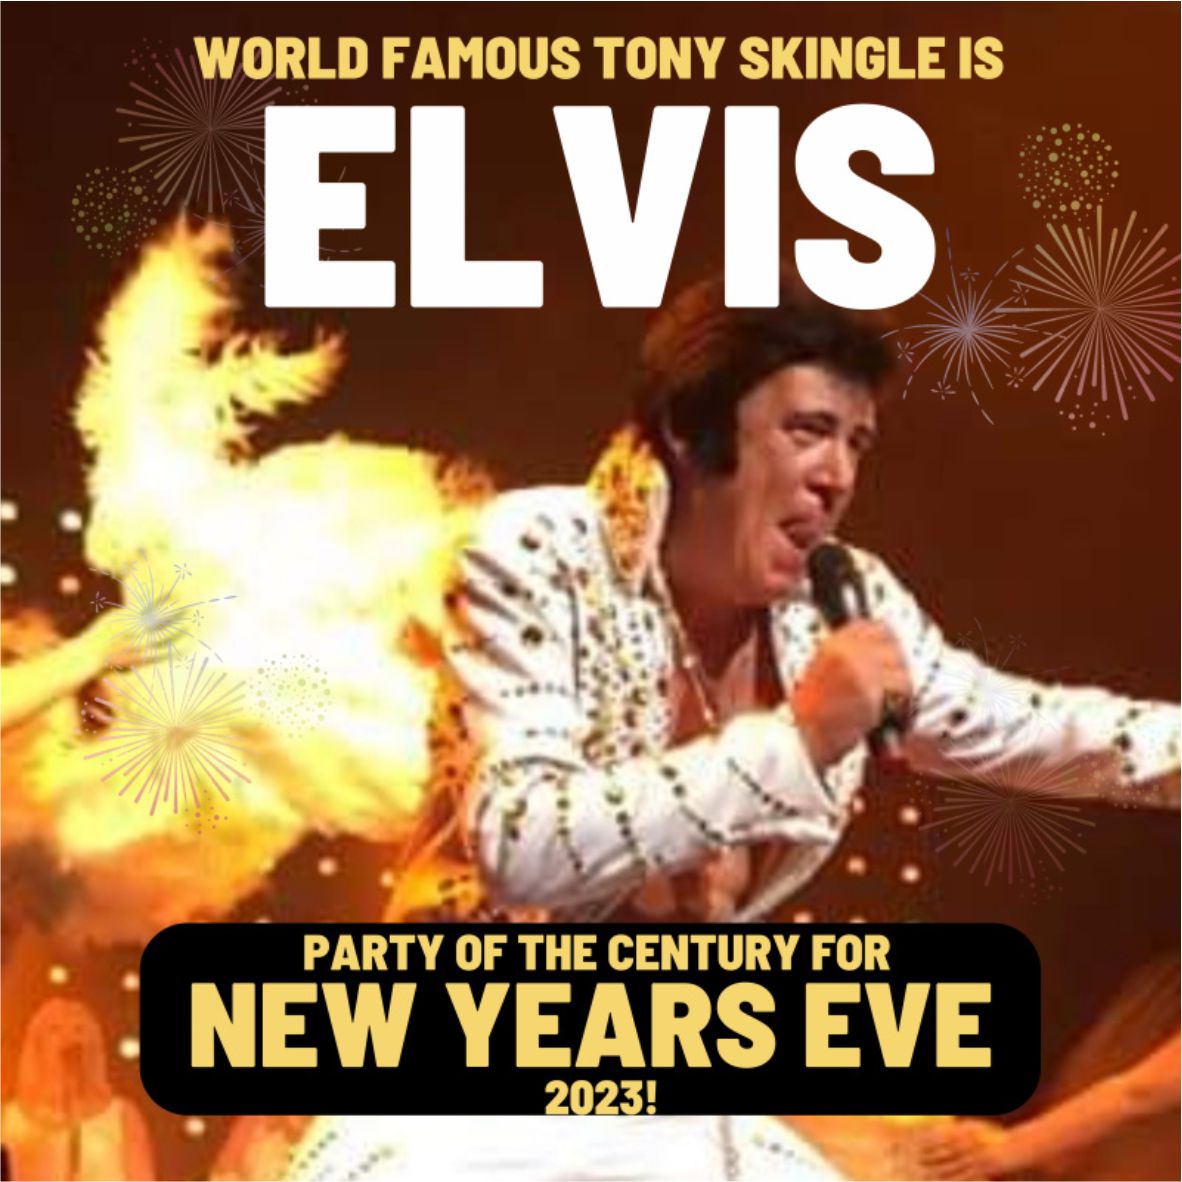 New Year's Eve Extravaganza with Tony Skingle as Elvis